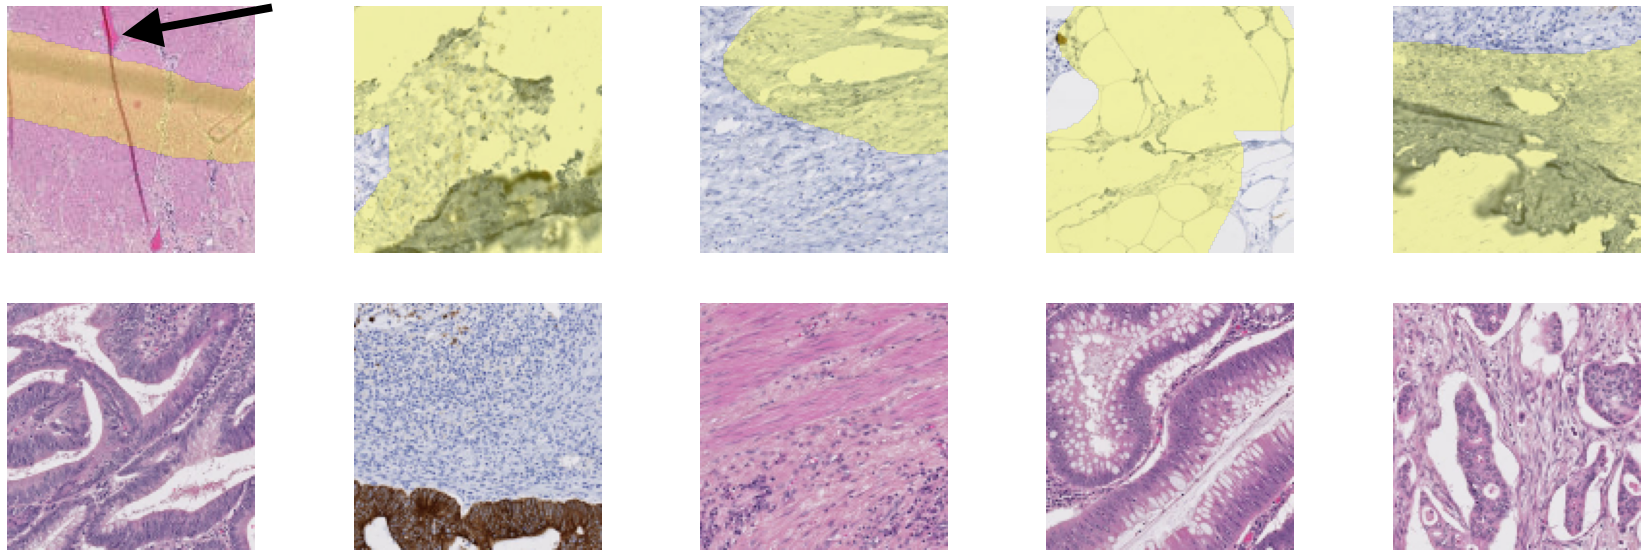 Figure 6.4. Examples of 128x128px tiles extracted from the WSIs in block A, with their corresponding annotation mask (positive artefactual regions in yellow). A missing annotation can be seen in the first tile (black arrow).